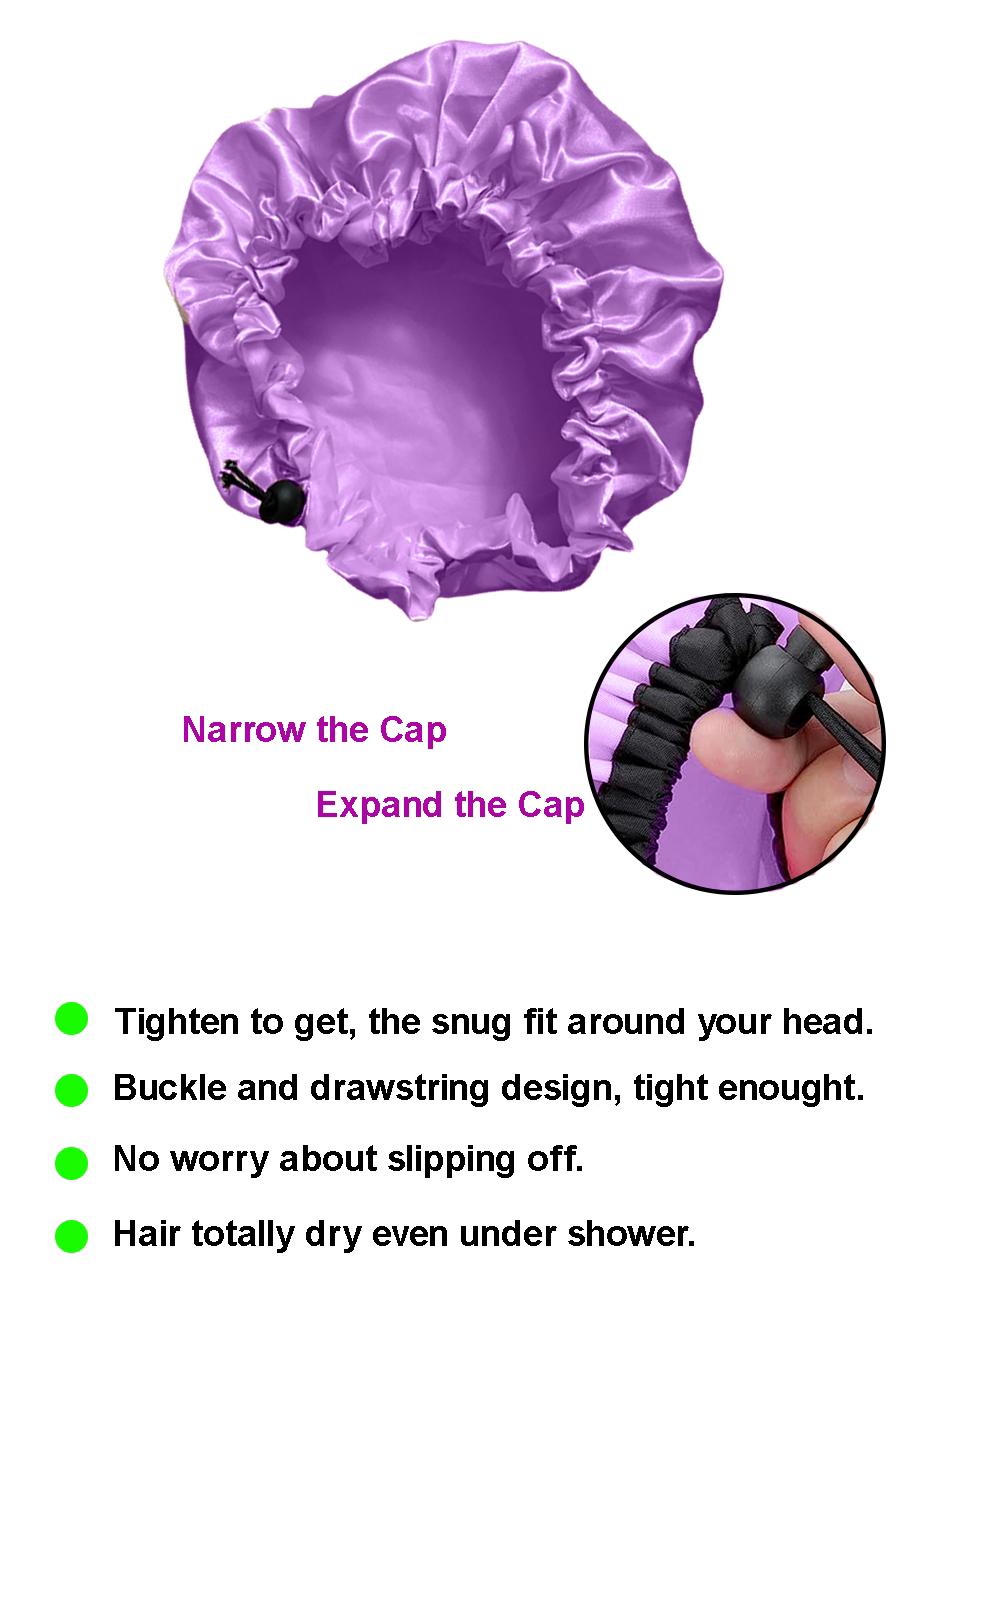 Hair Guard Reusable Shower Cap - Waterproof and Adjustable Shower Caps&nbsp; for Women and Men, Ideal for long and thick hair, Easily adjustable 3 pieces in 1 pack. (COLORS: BLACK, PINK, PURPLE)